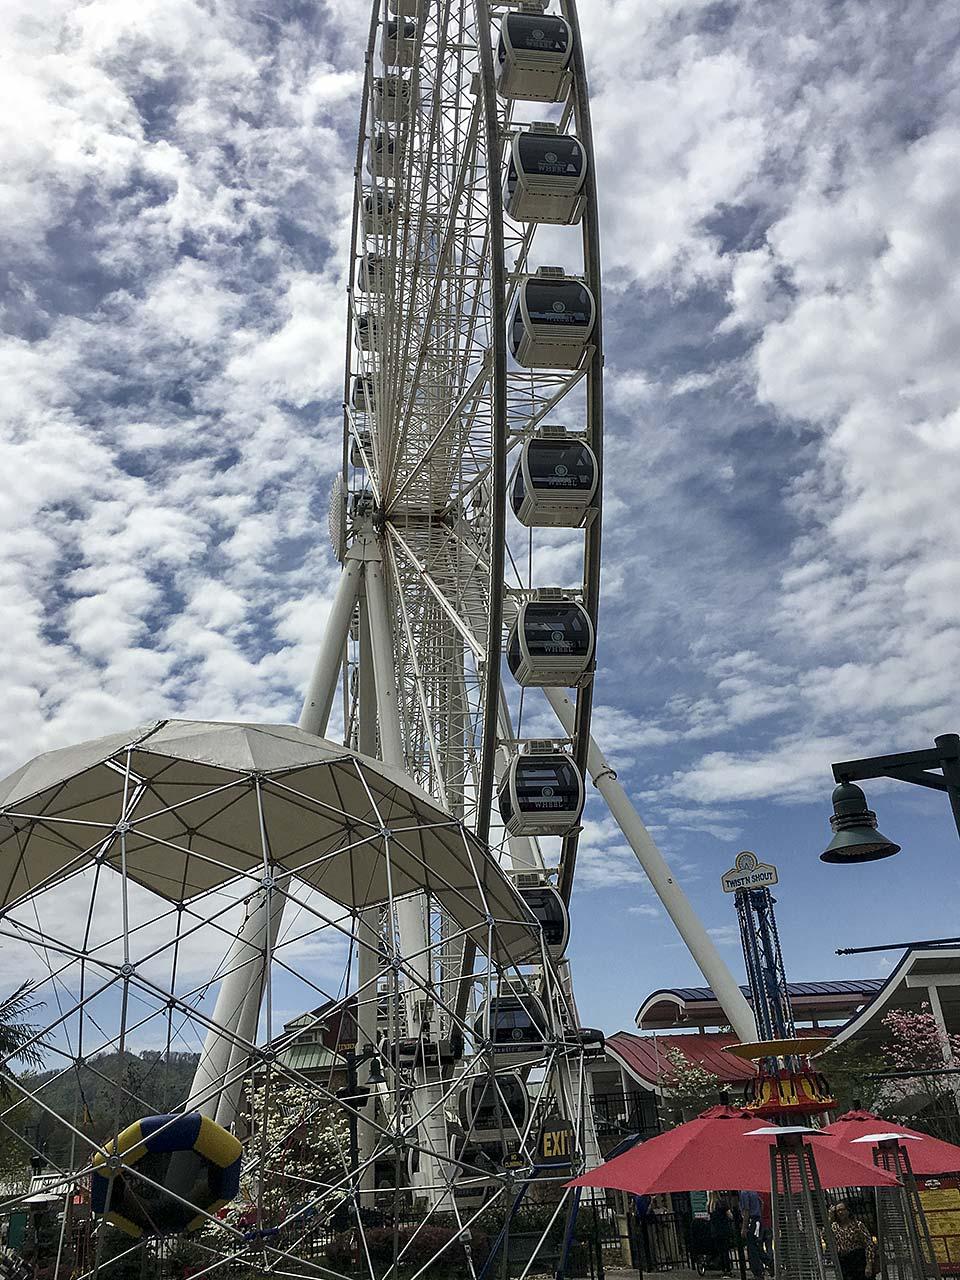 Large wheel in Pigeon Forge, TN.